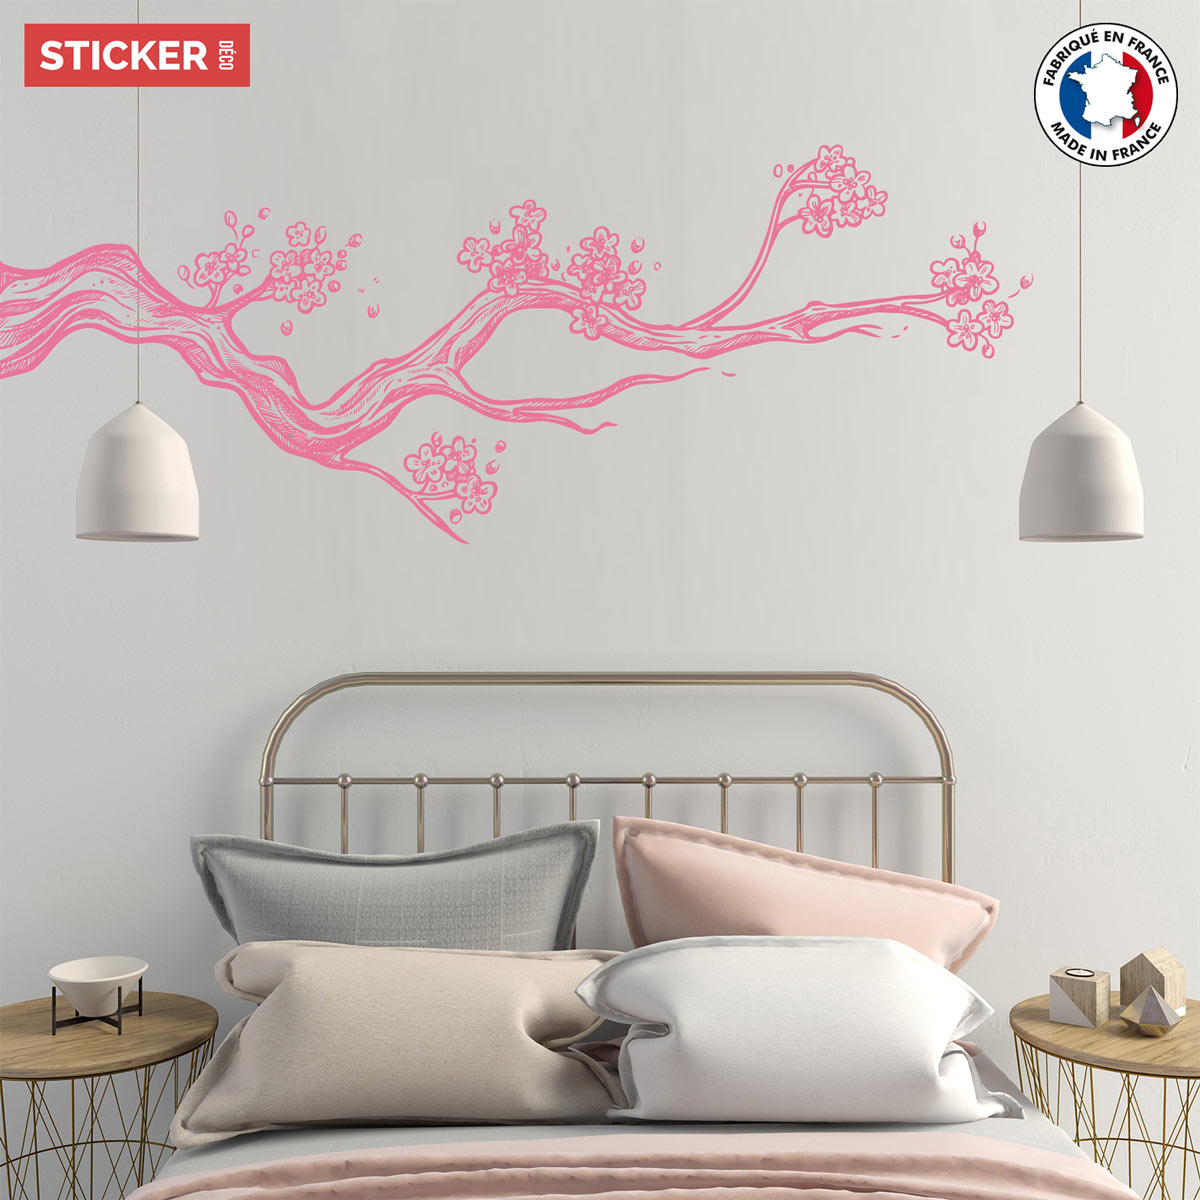 Stickers Branches Cerisier - Stickers Arbres